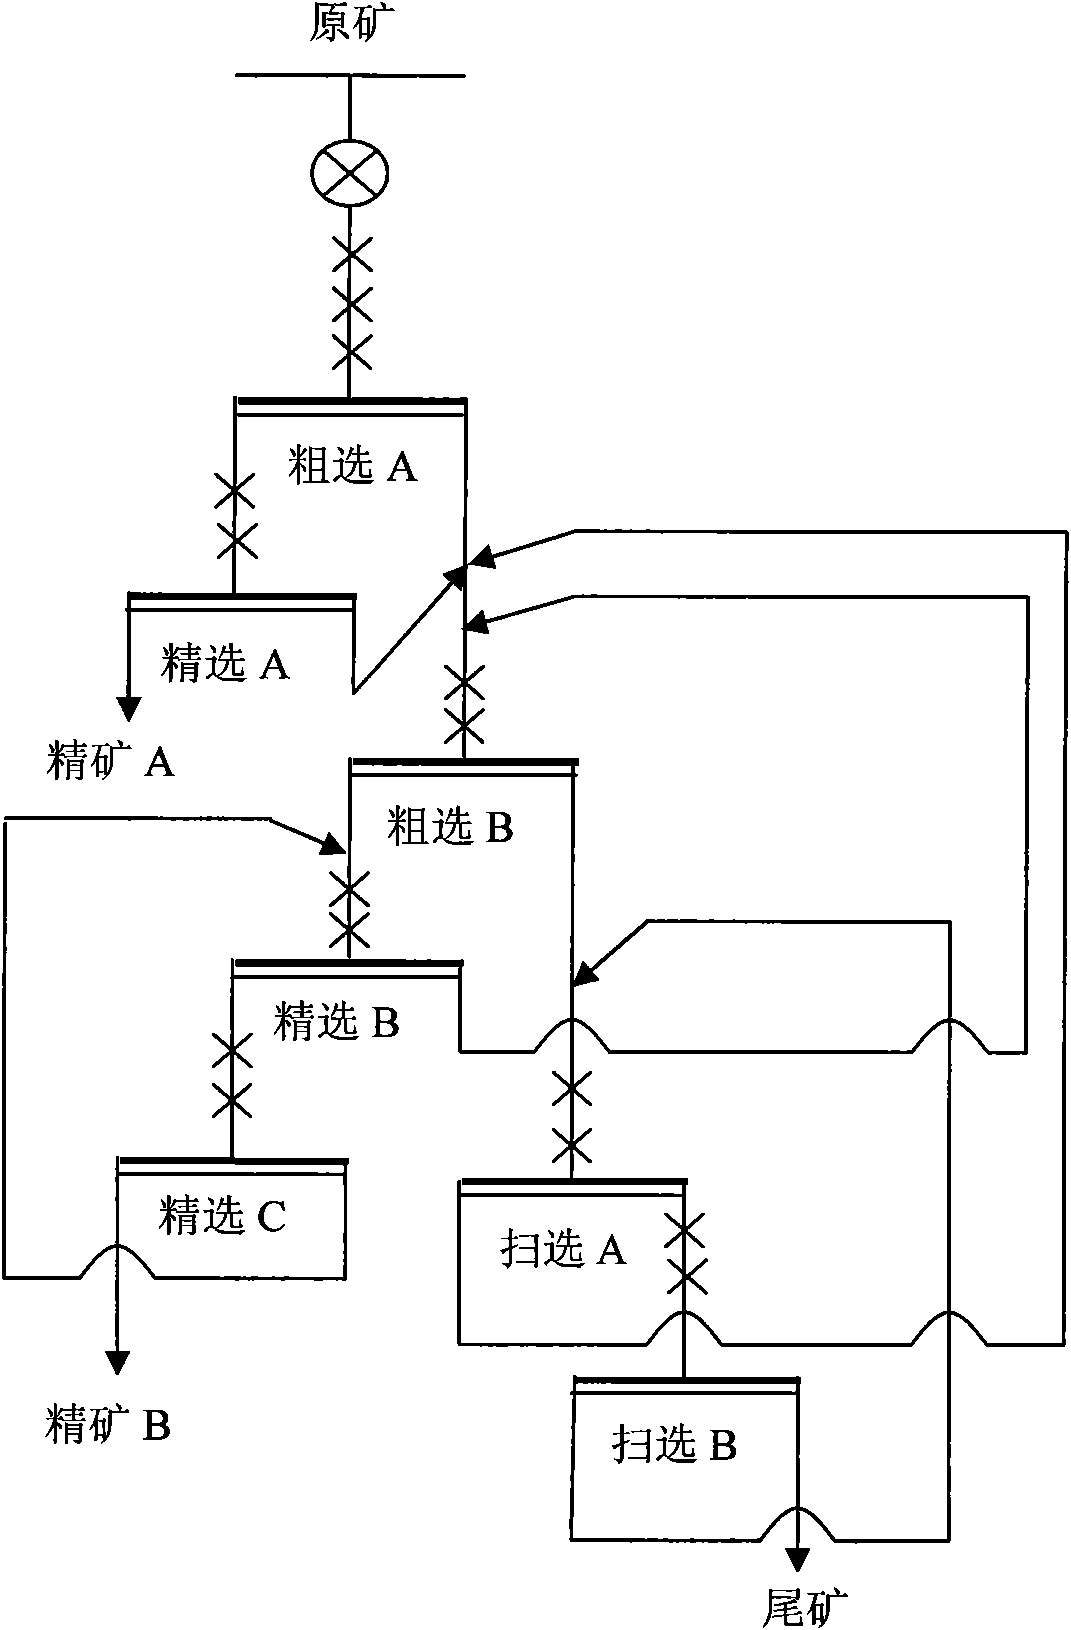 Method of fast-flotation of bauxite with low Al/Si (aluminum/silicon) ratio